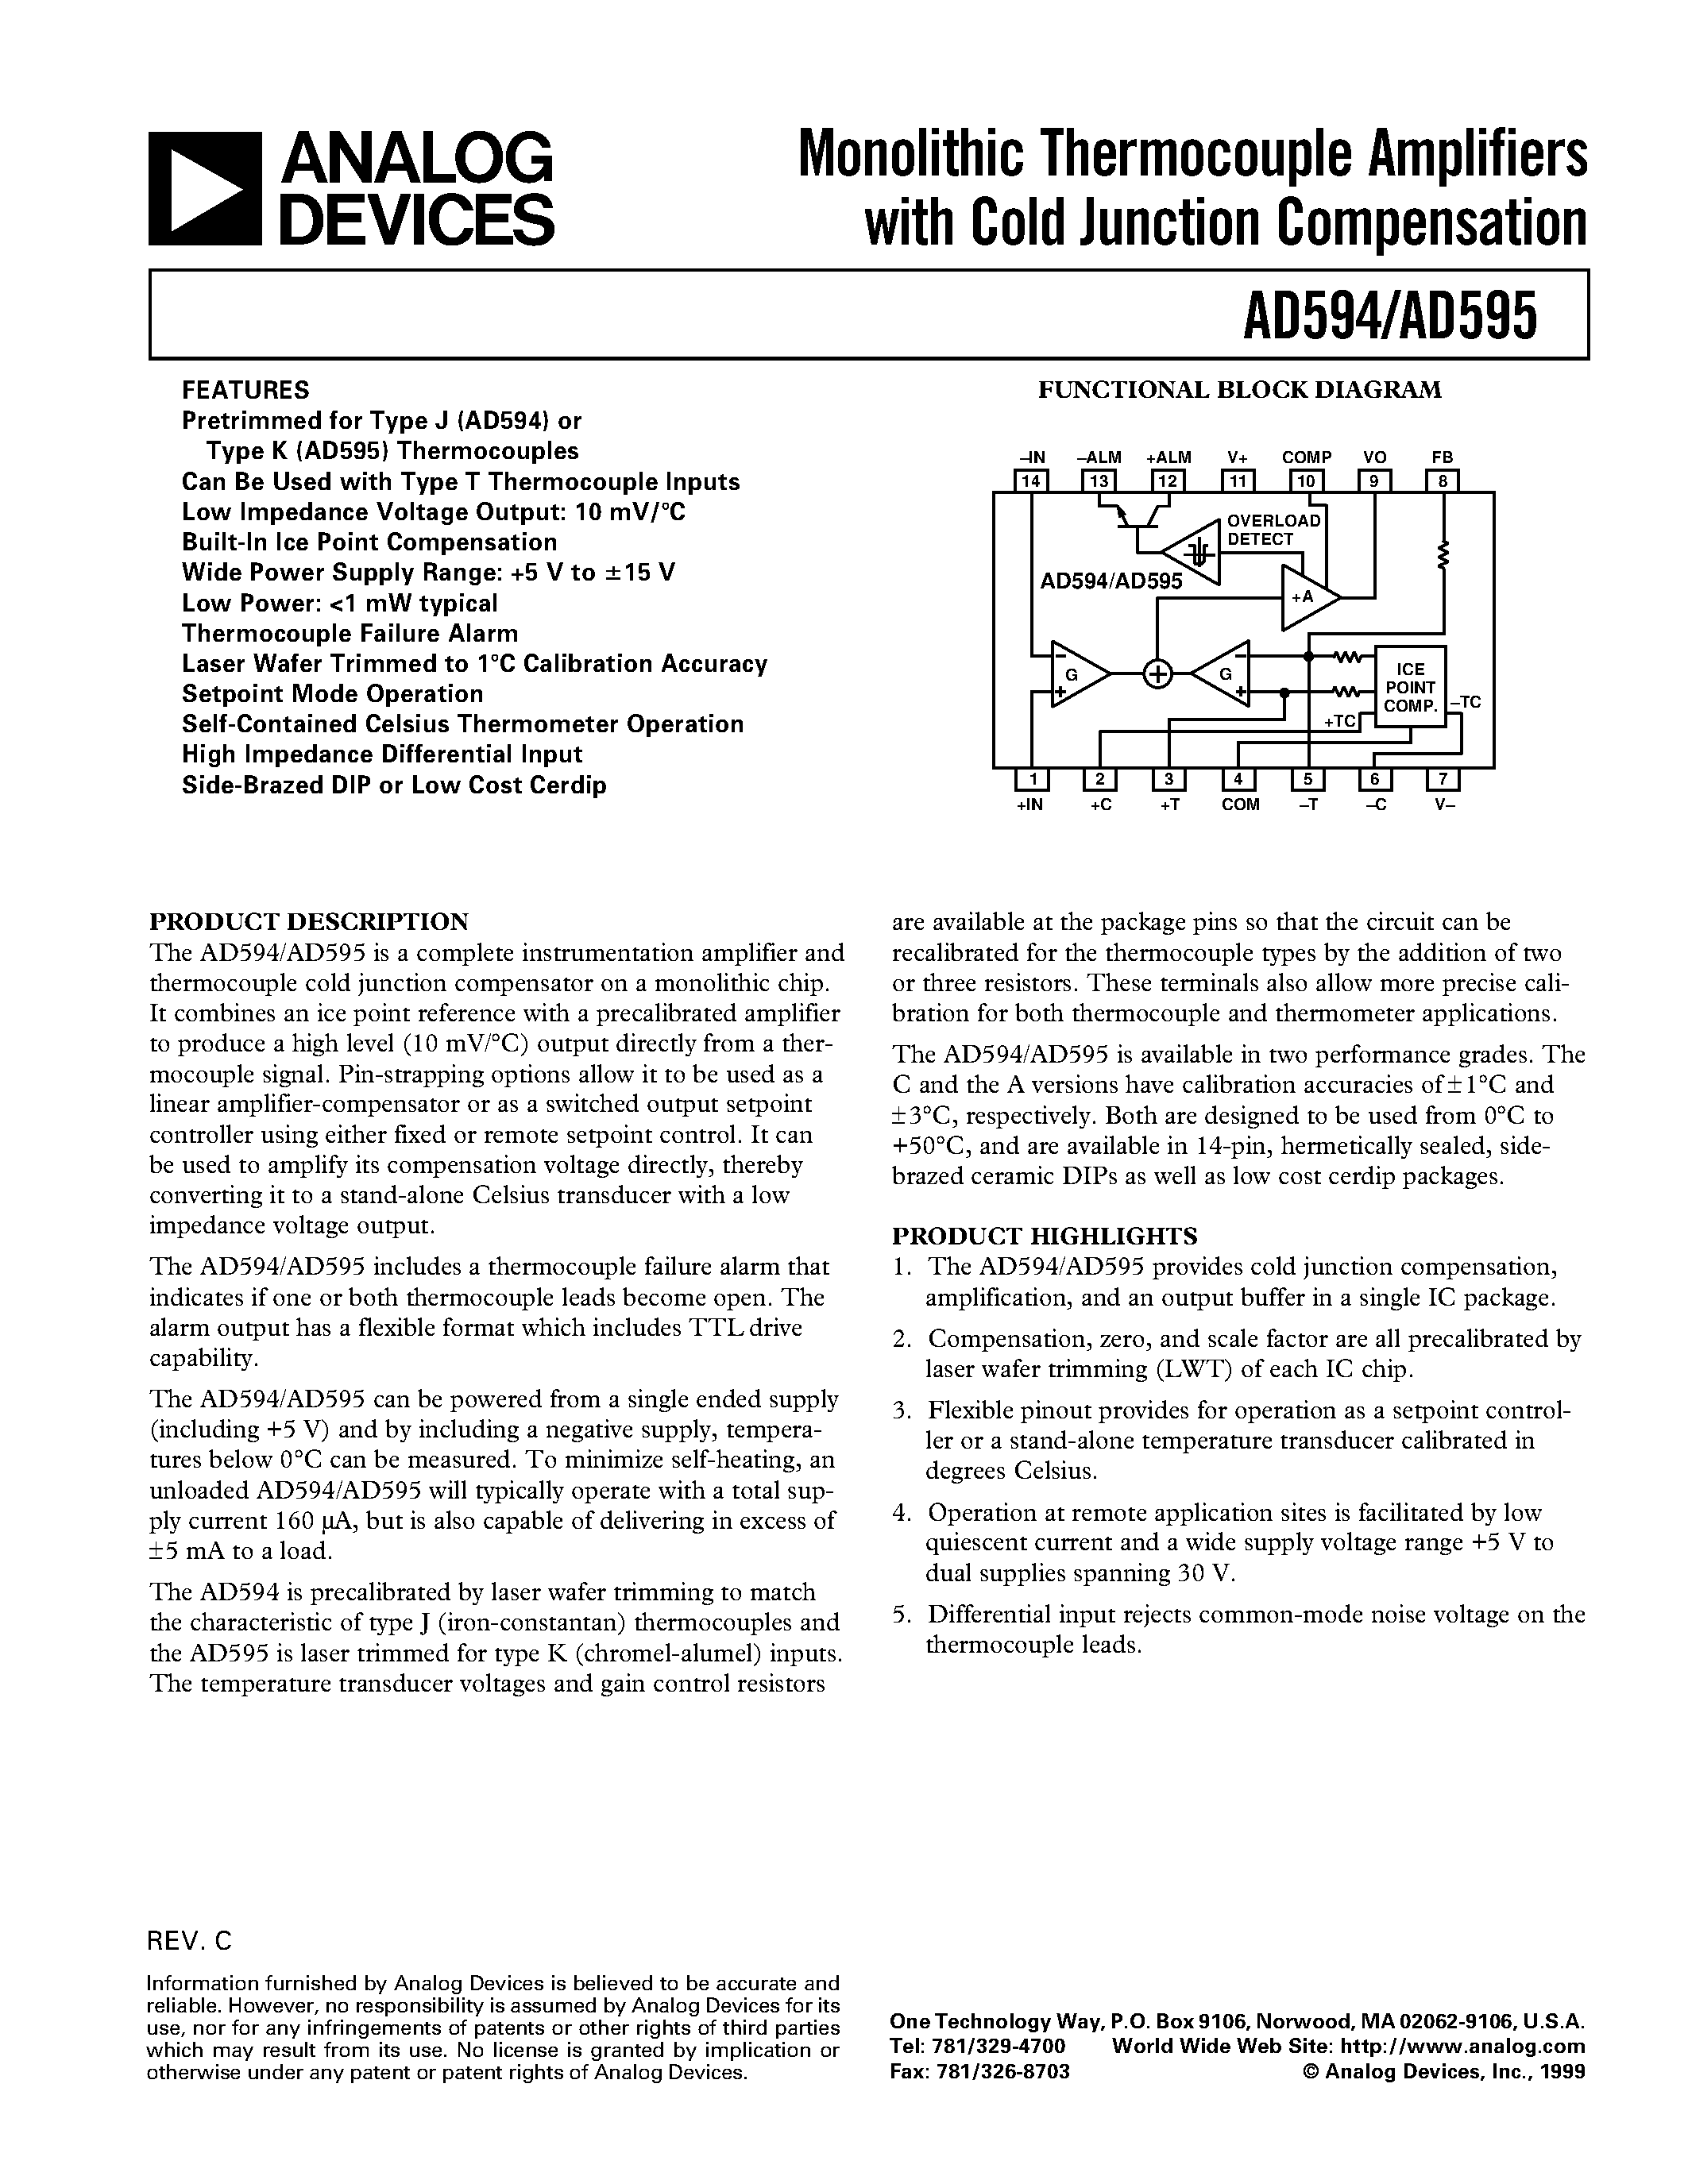 Datasheet AD595AQ - Monolithic Thermocouple Amplifiers with Cold Junction Compensation page 1